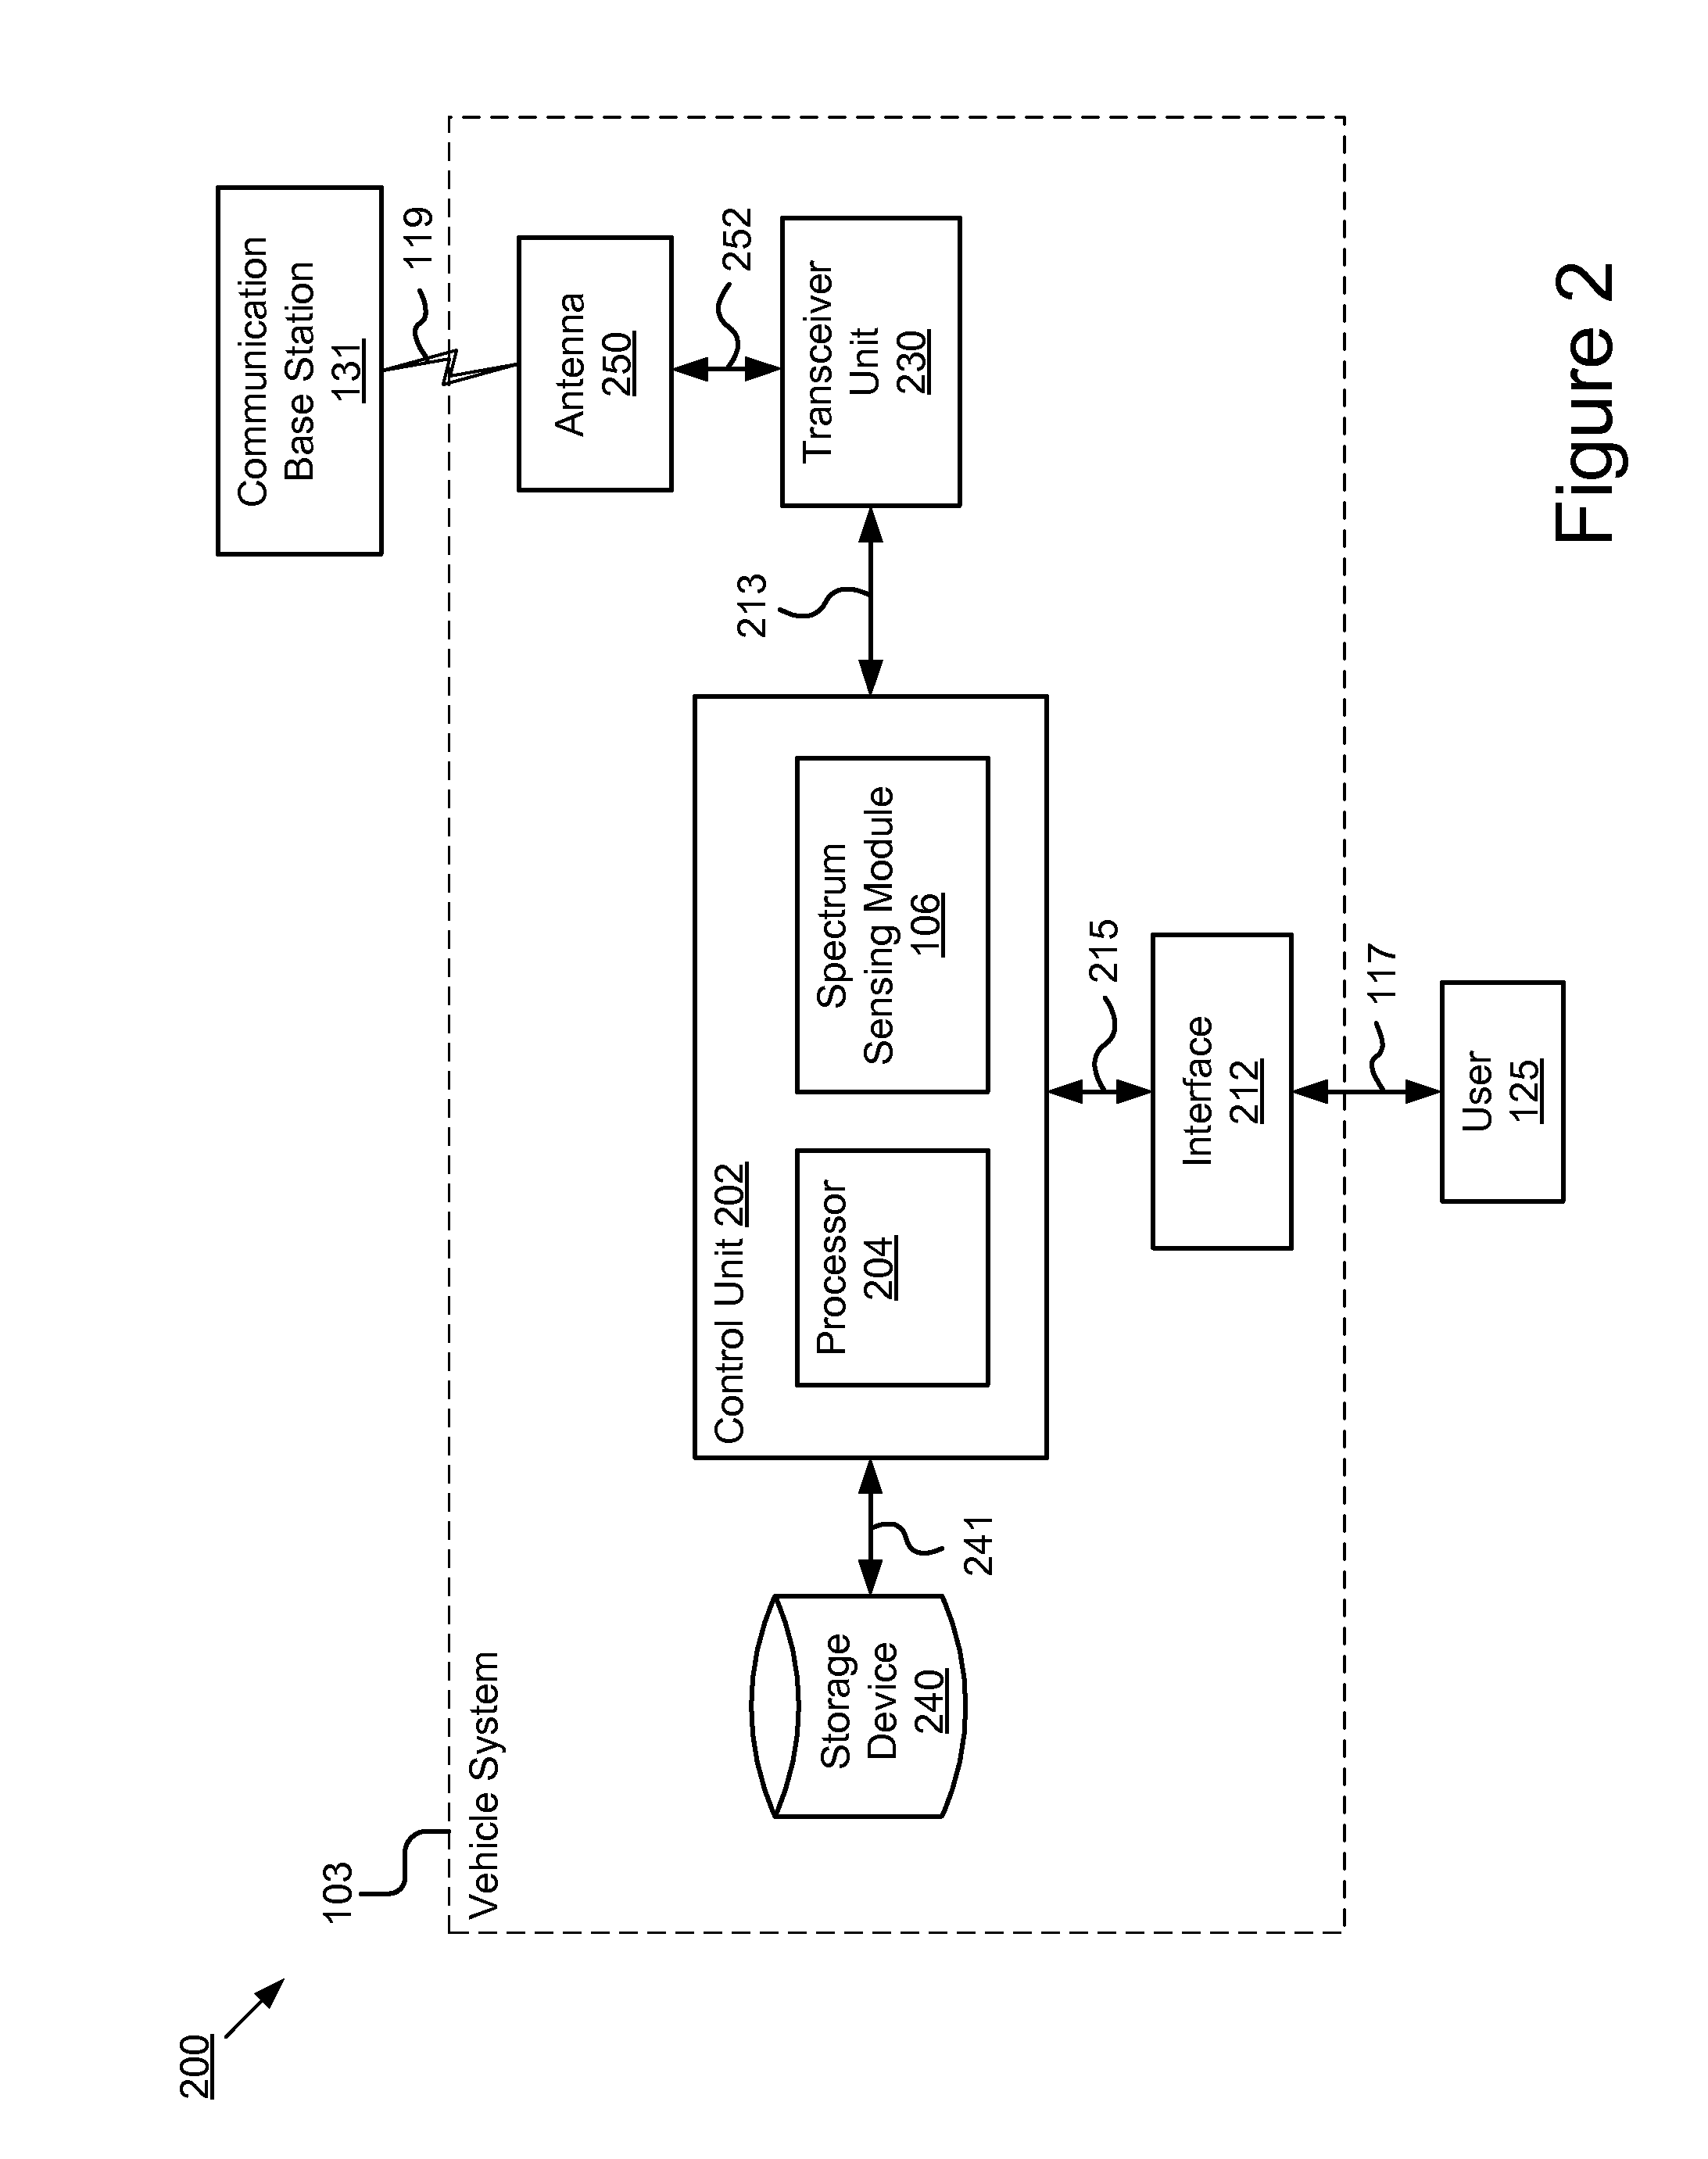 System for Distributed Spectrum Sensing In a Highly Mobile Vehicular Environment